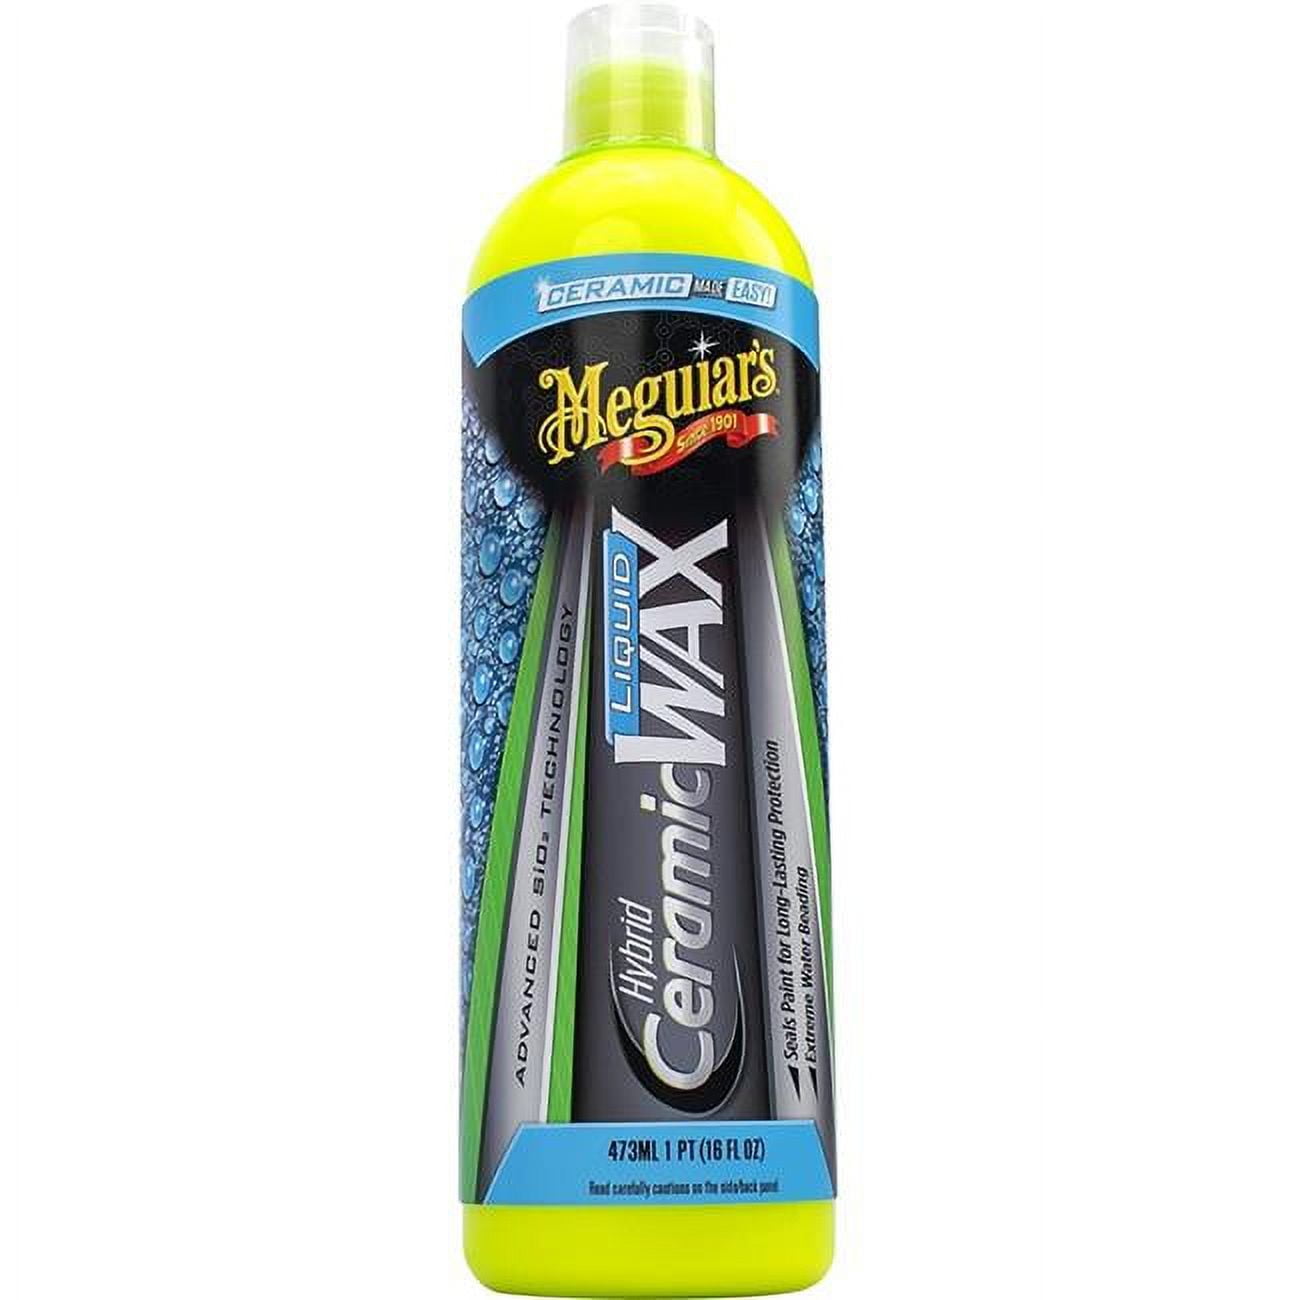 Meguiar's Cleaner Wax - Paste Wax Cleans, Shines and Protects in